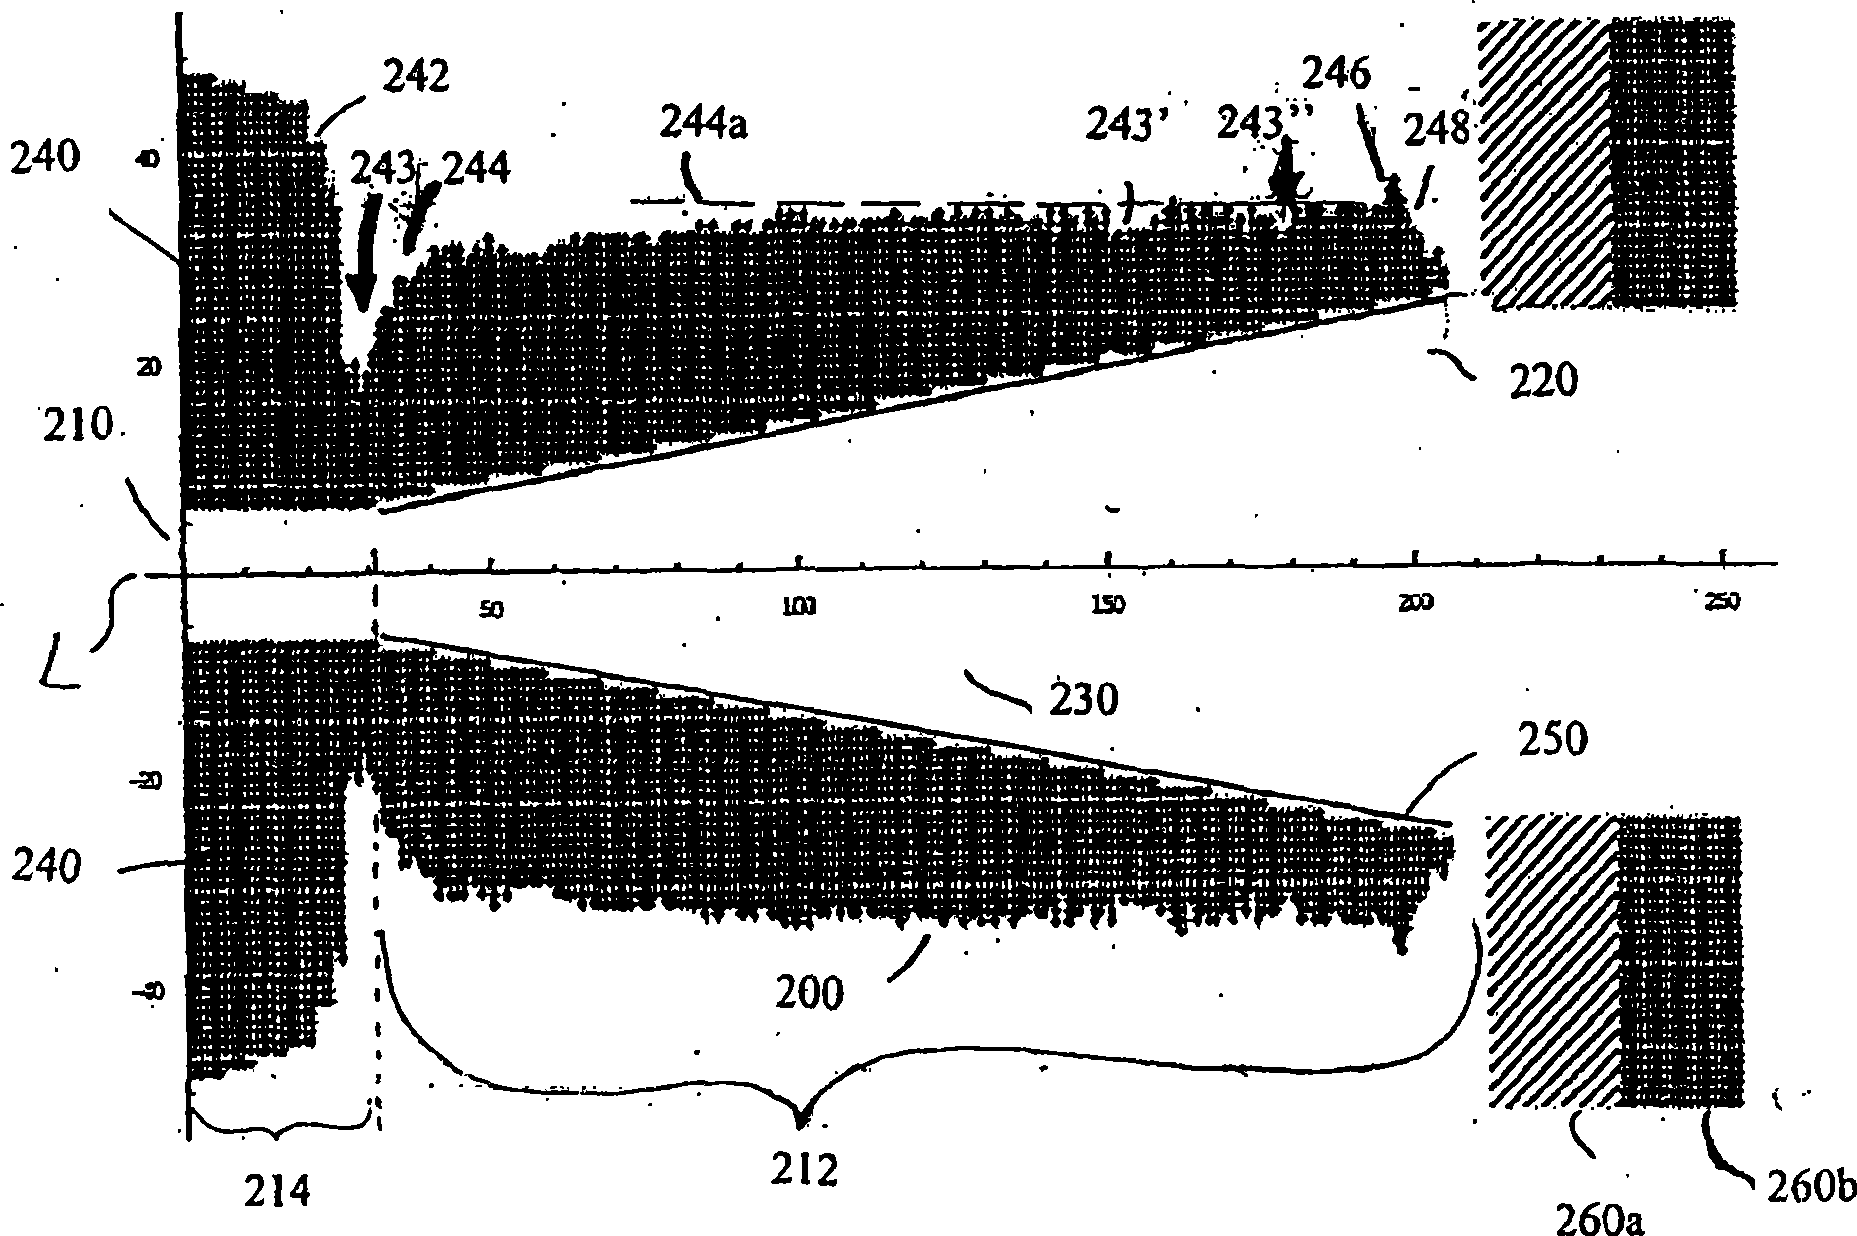 Zeeman-slower, coil for a zeeman-slower device and method for cooling an atom beam